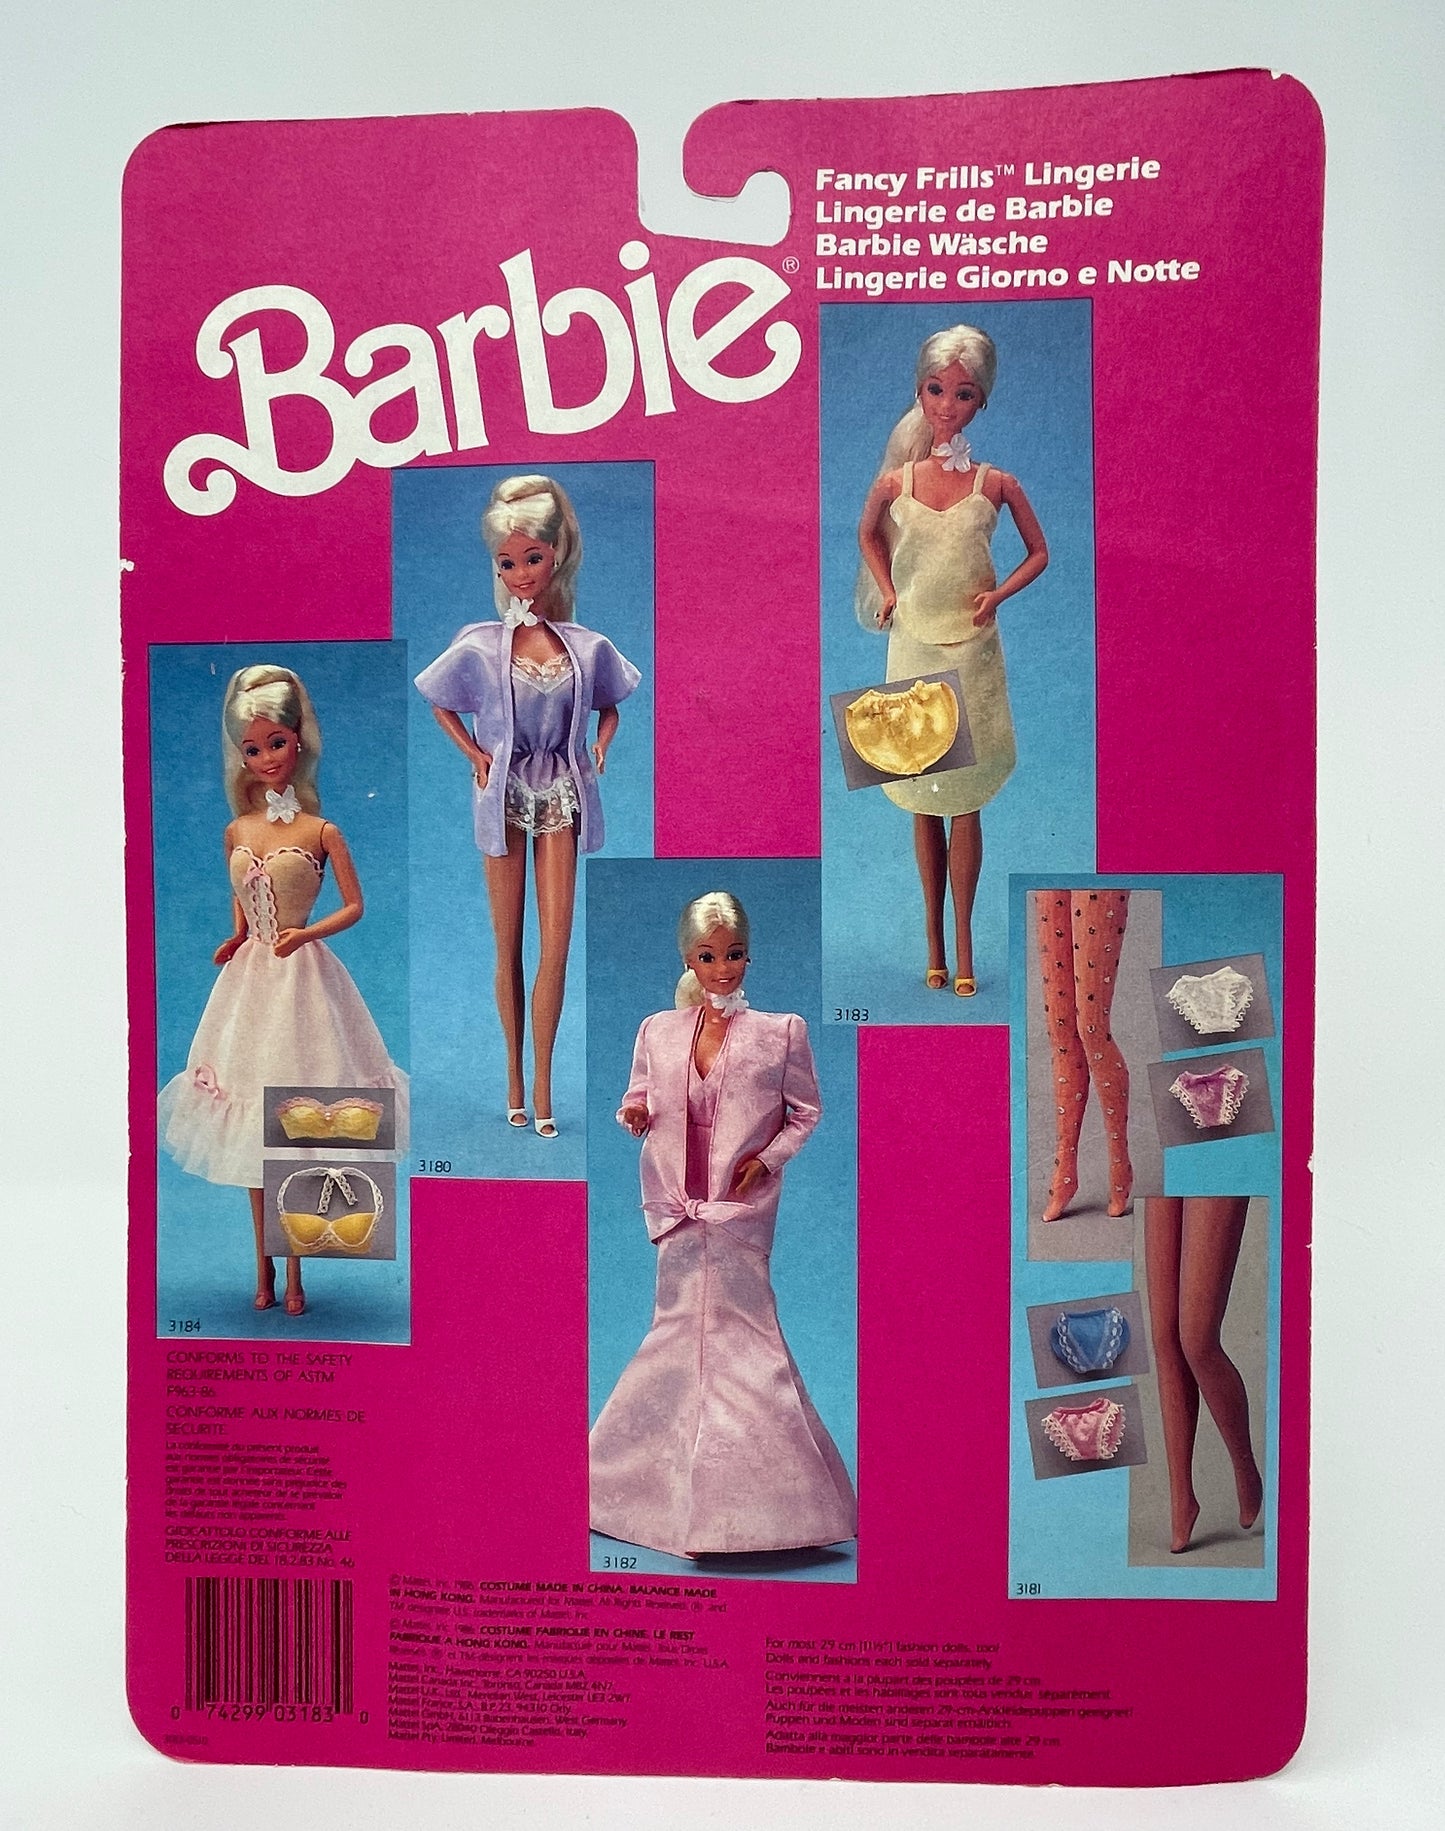 BARBIE - FANCY FRILLS LINGERIE - YELLOW CAMISOLE, SLIP AND SHOES #3183 MATTEL 1986